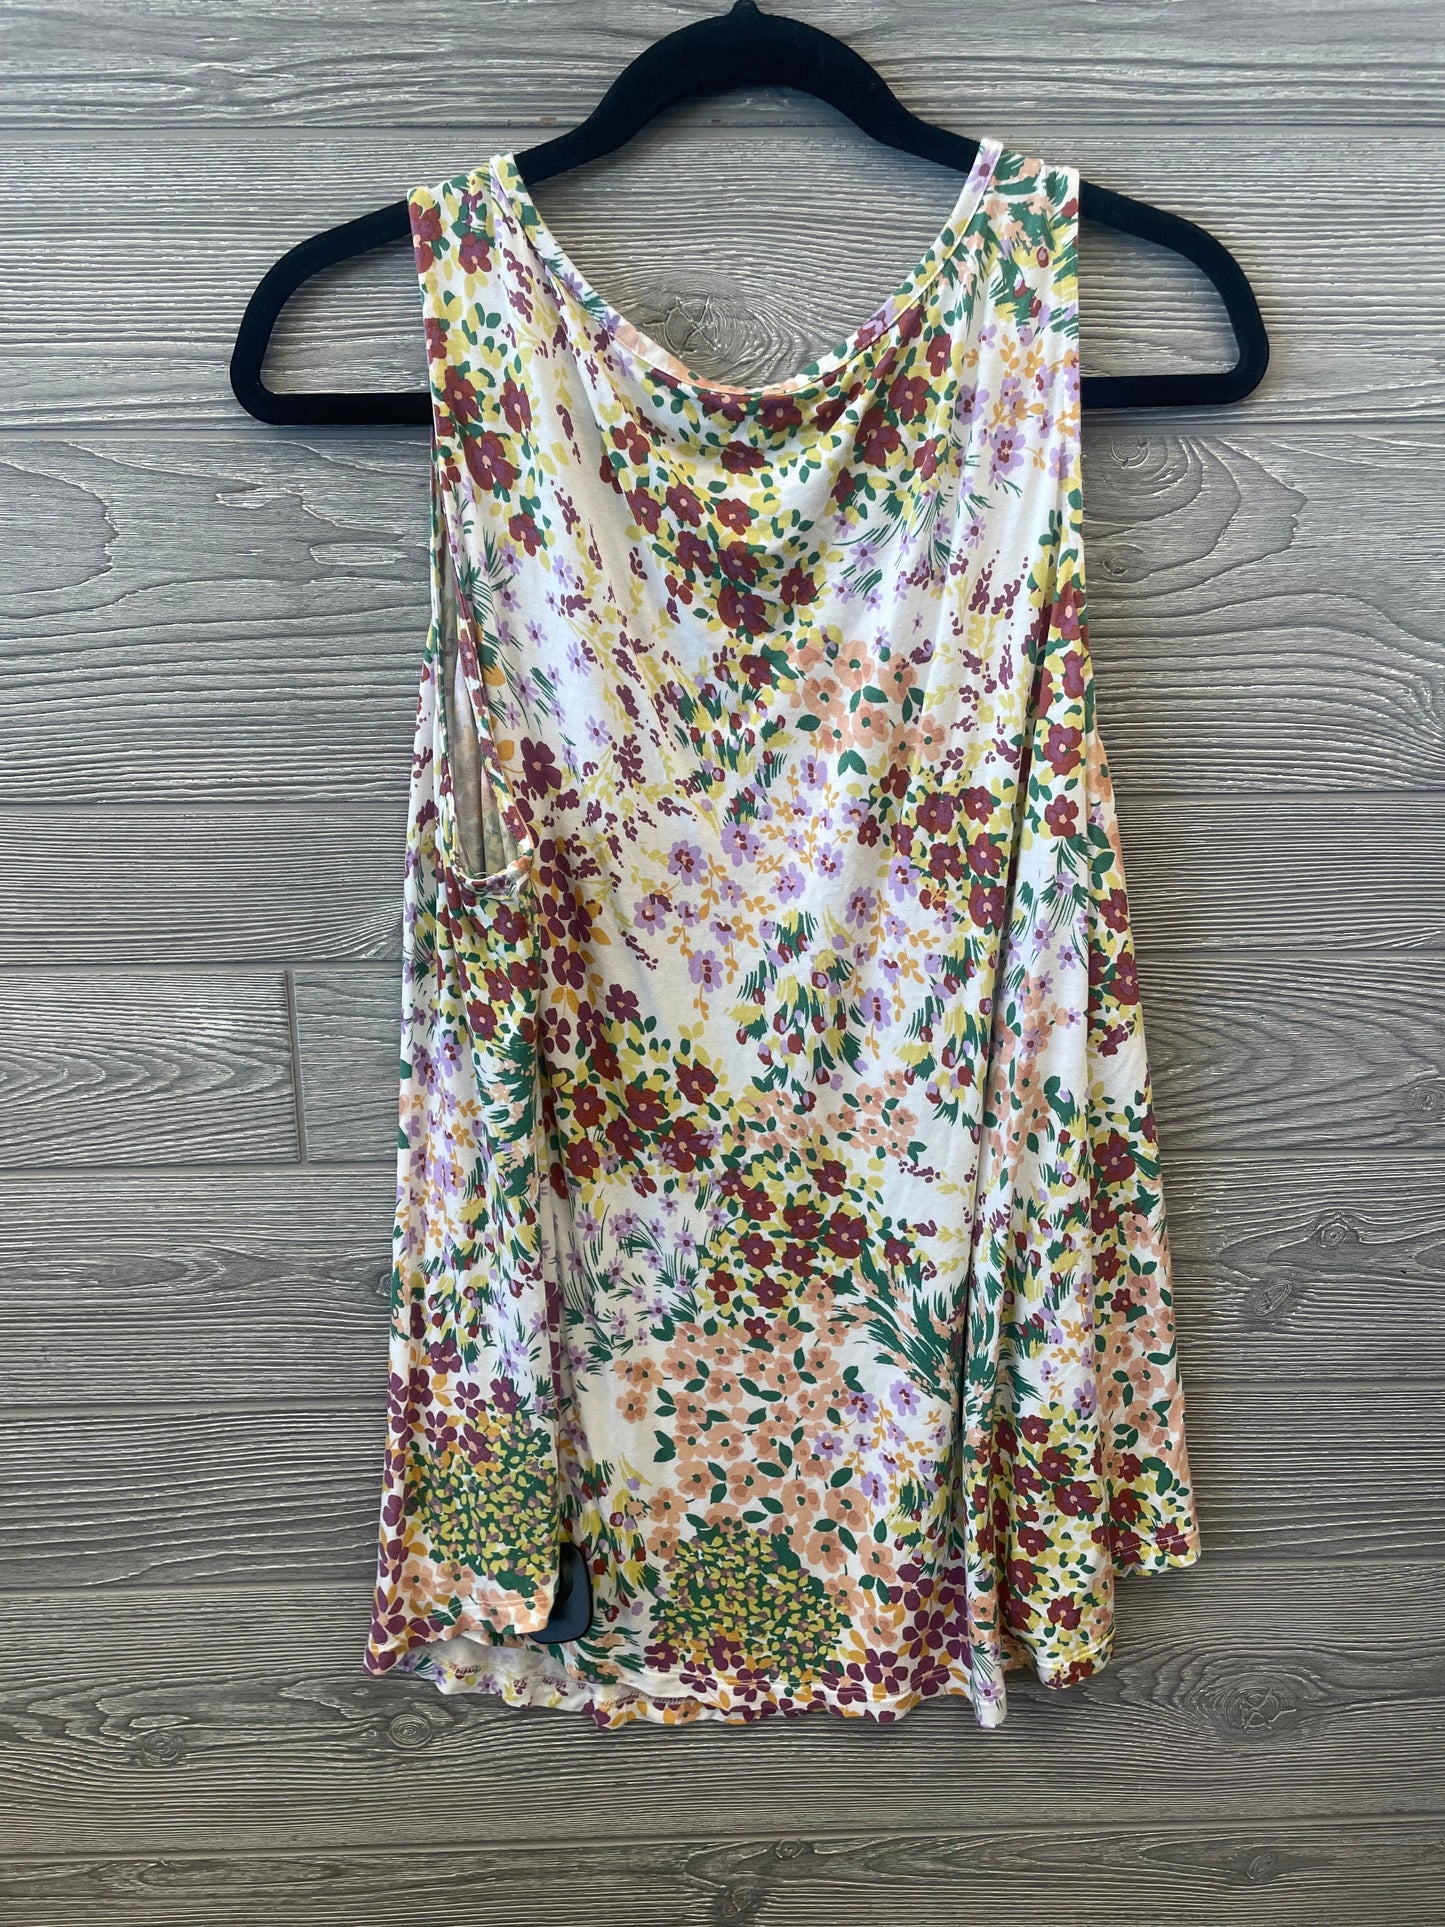 Top Sleeveless By Maurices  Size: 2x